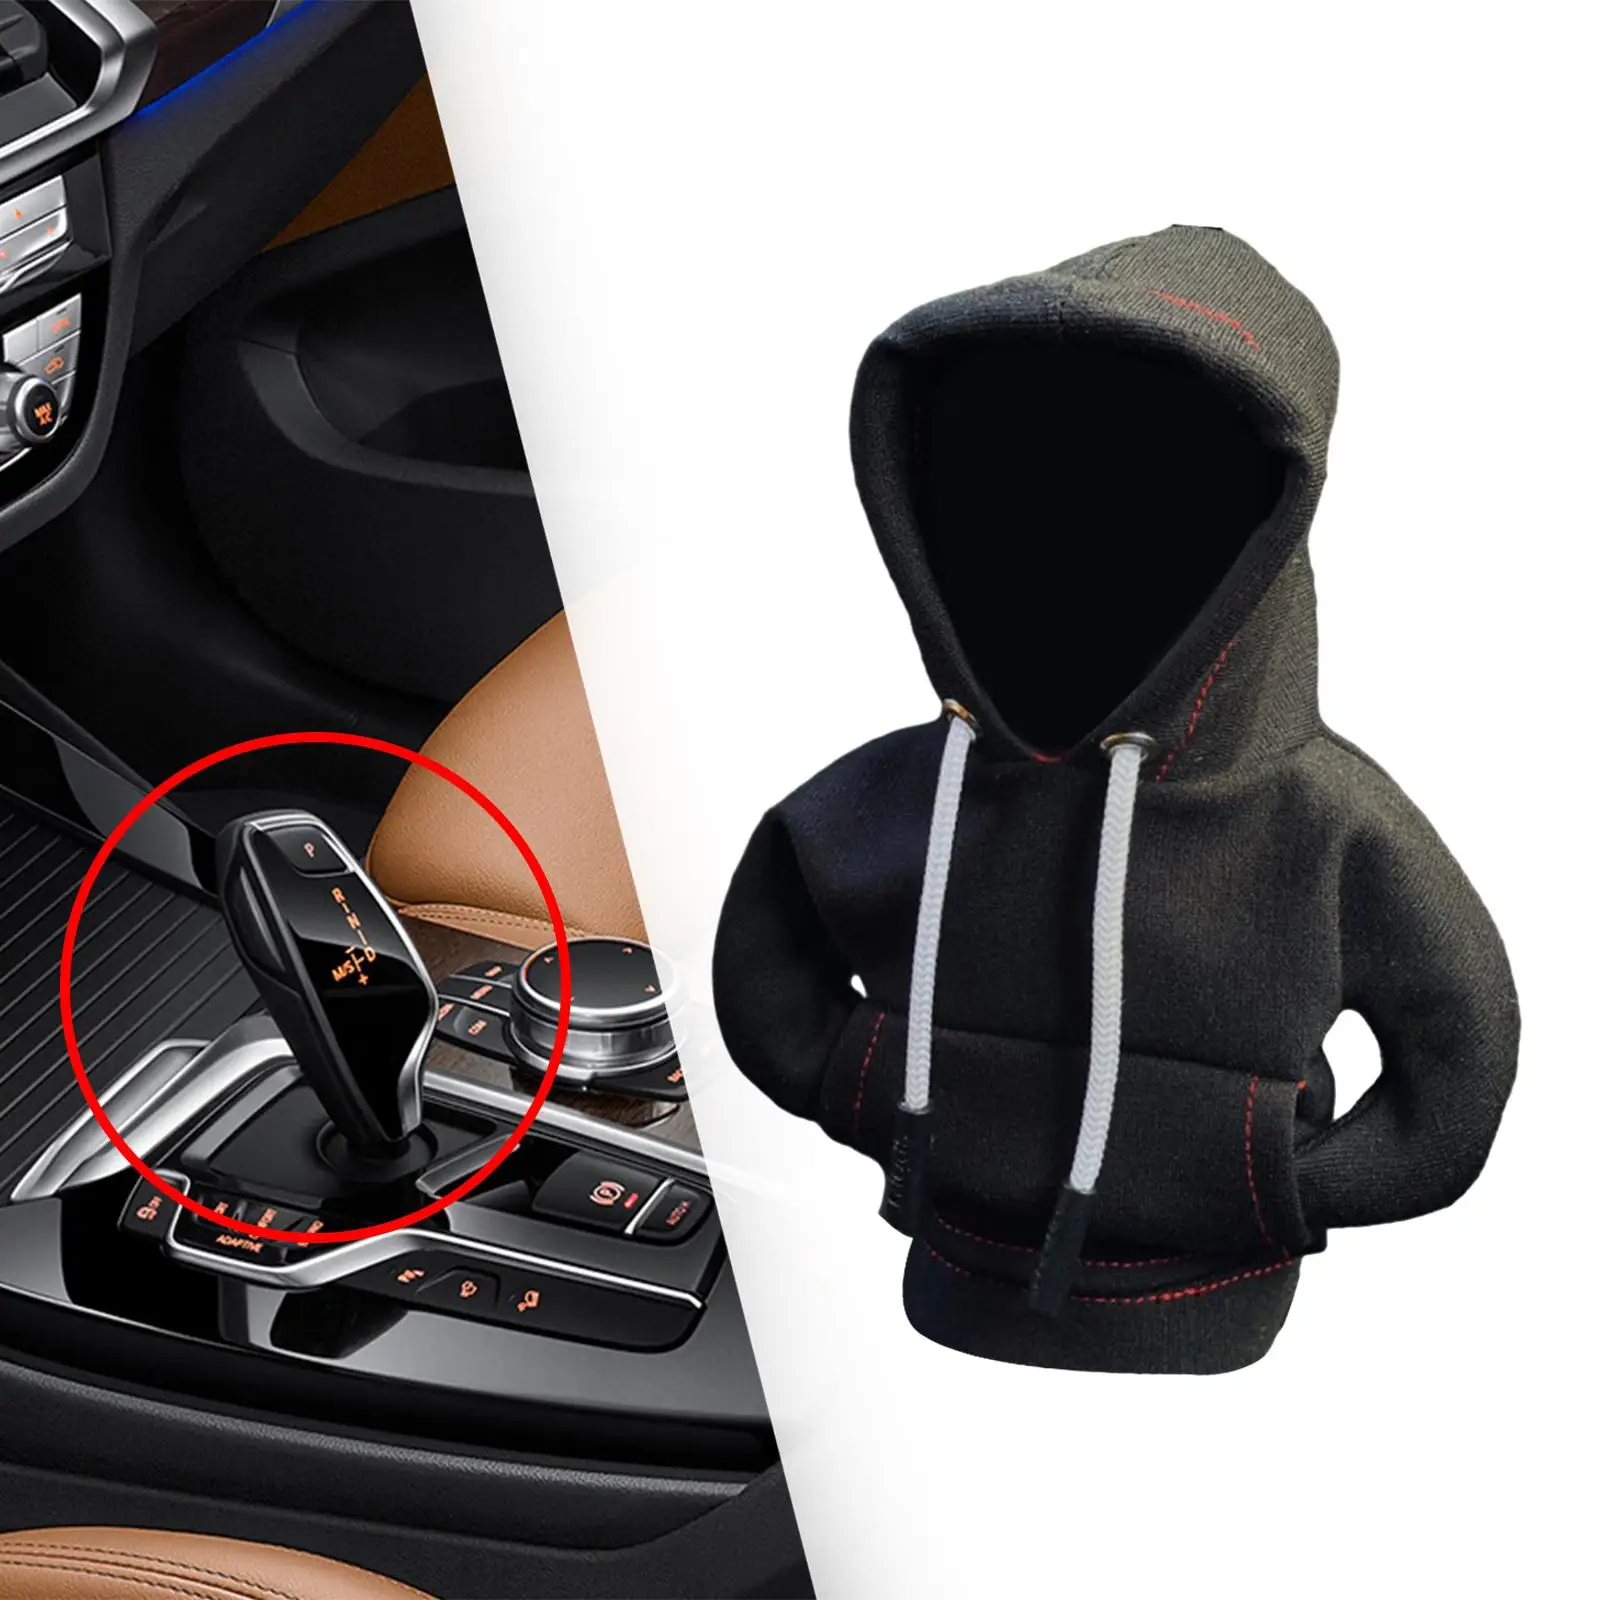 2xGear Shifter Lever Knob Cover Gear Handle Decor for Vehicles Women or Man Black